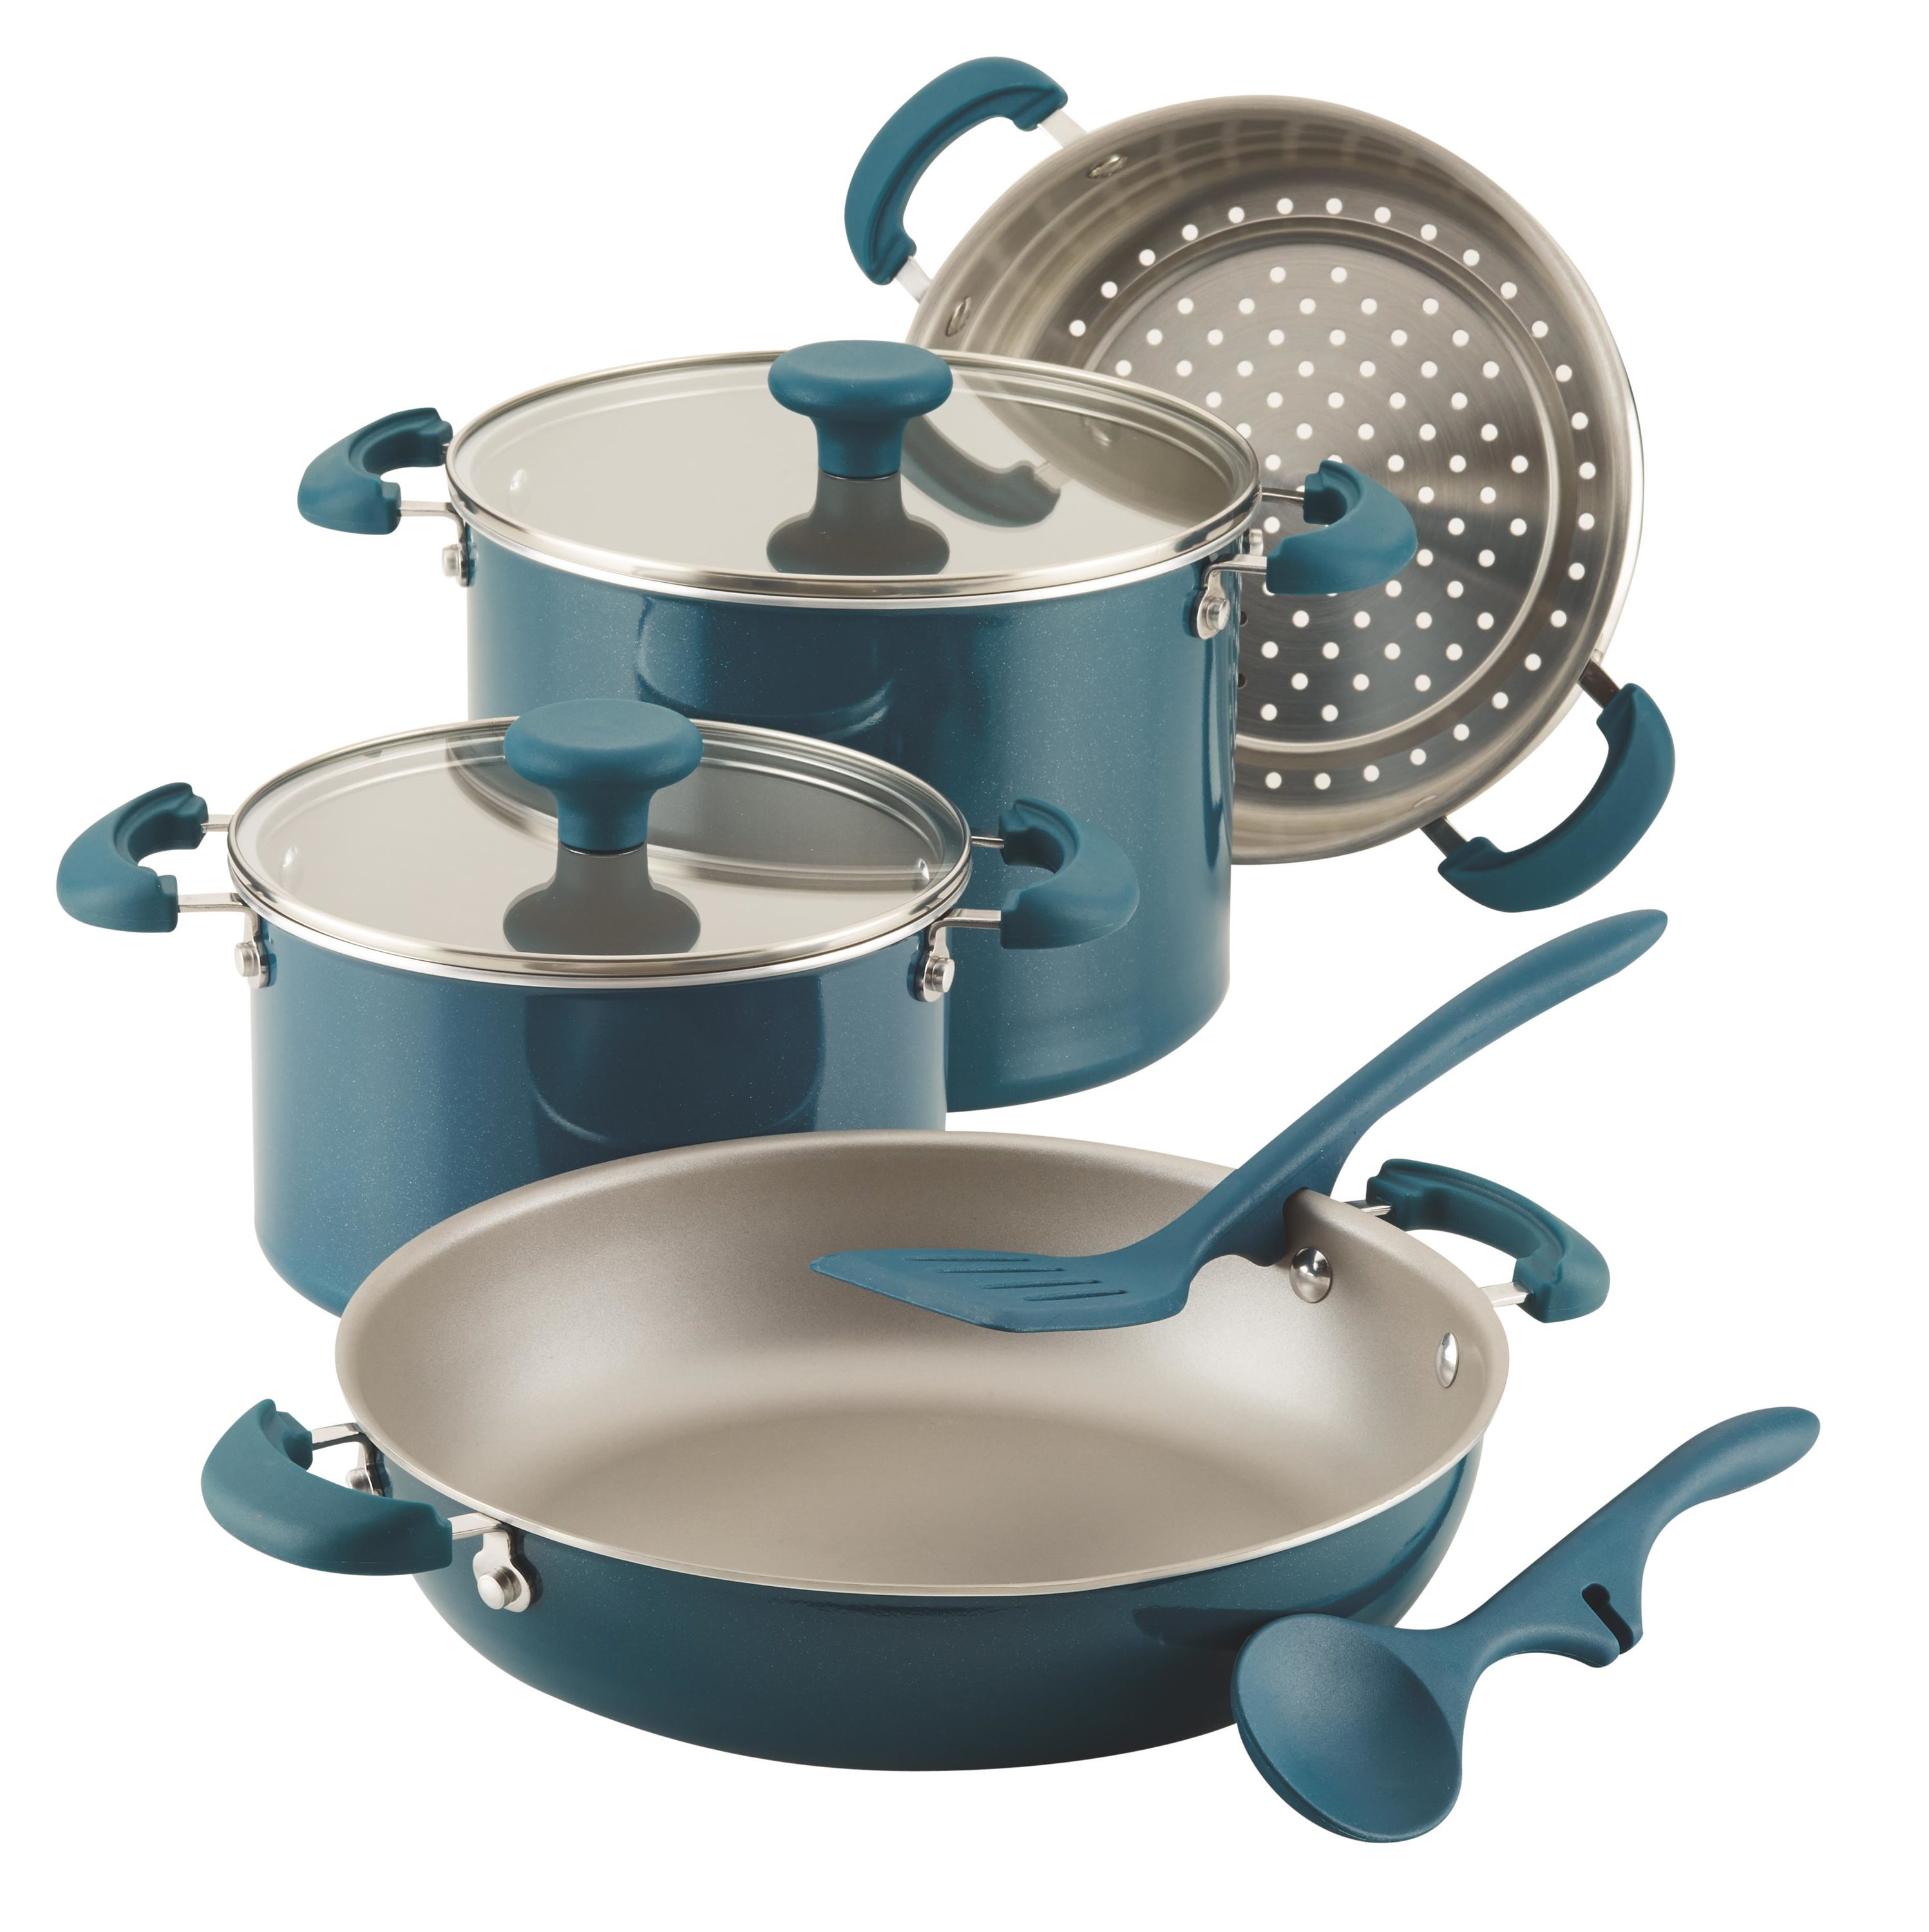 Rachael Ray Create Delicious 13-in Aluminum Cookware Set with Lid